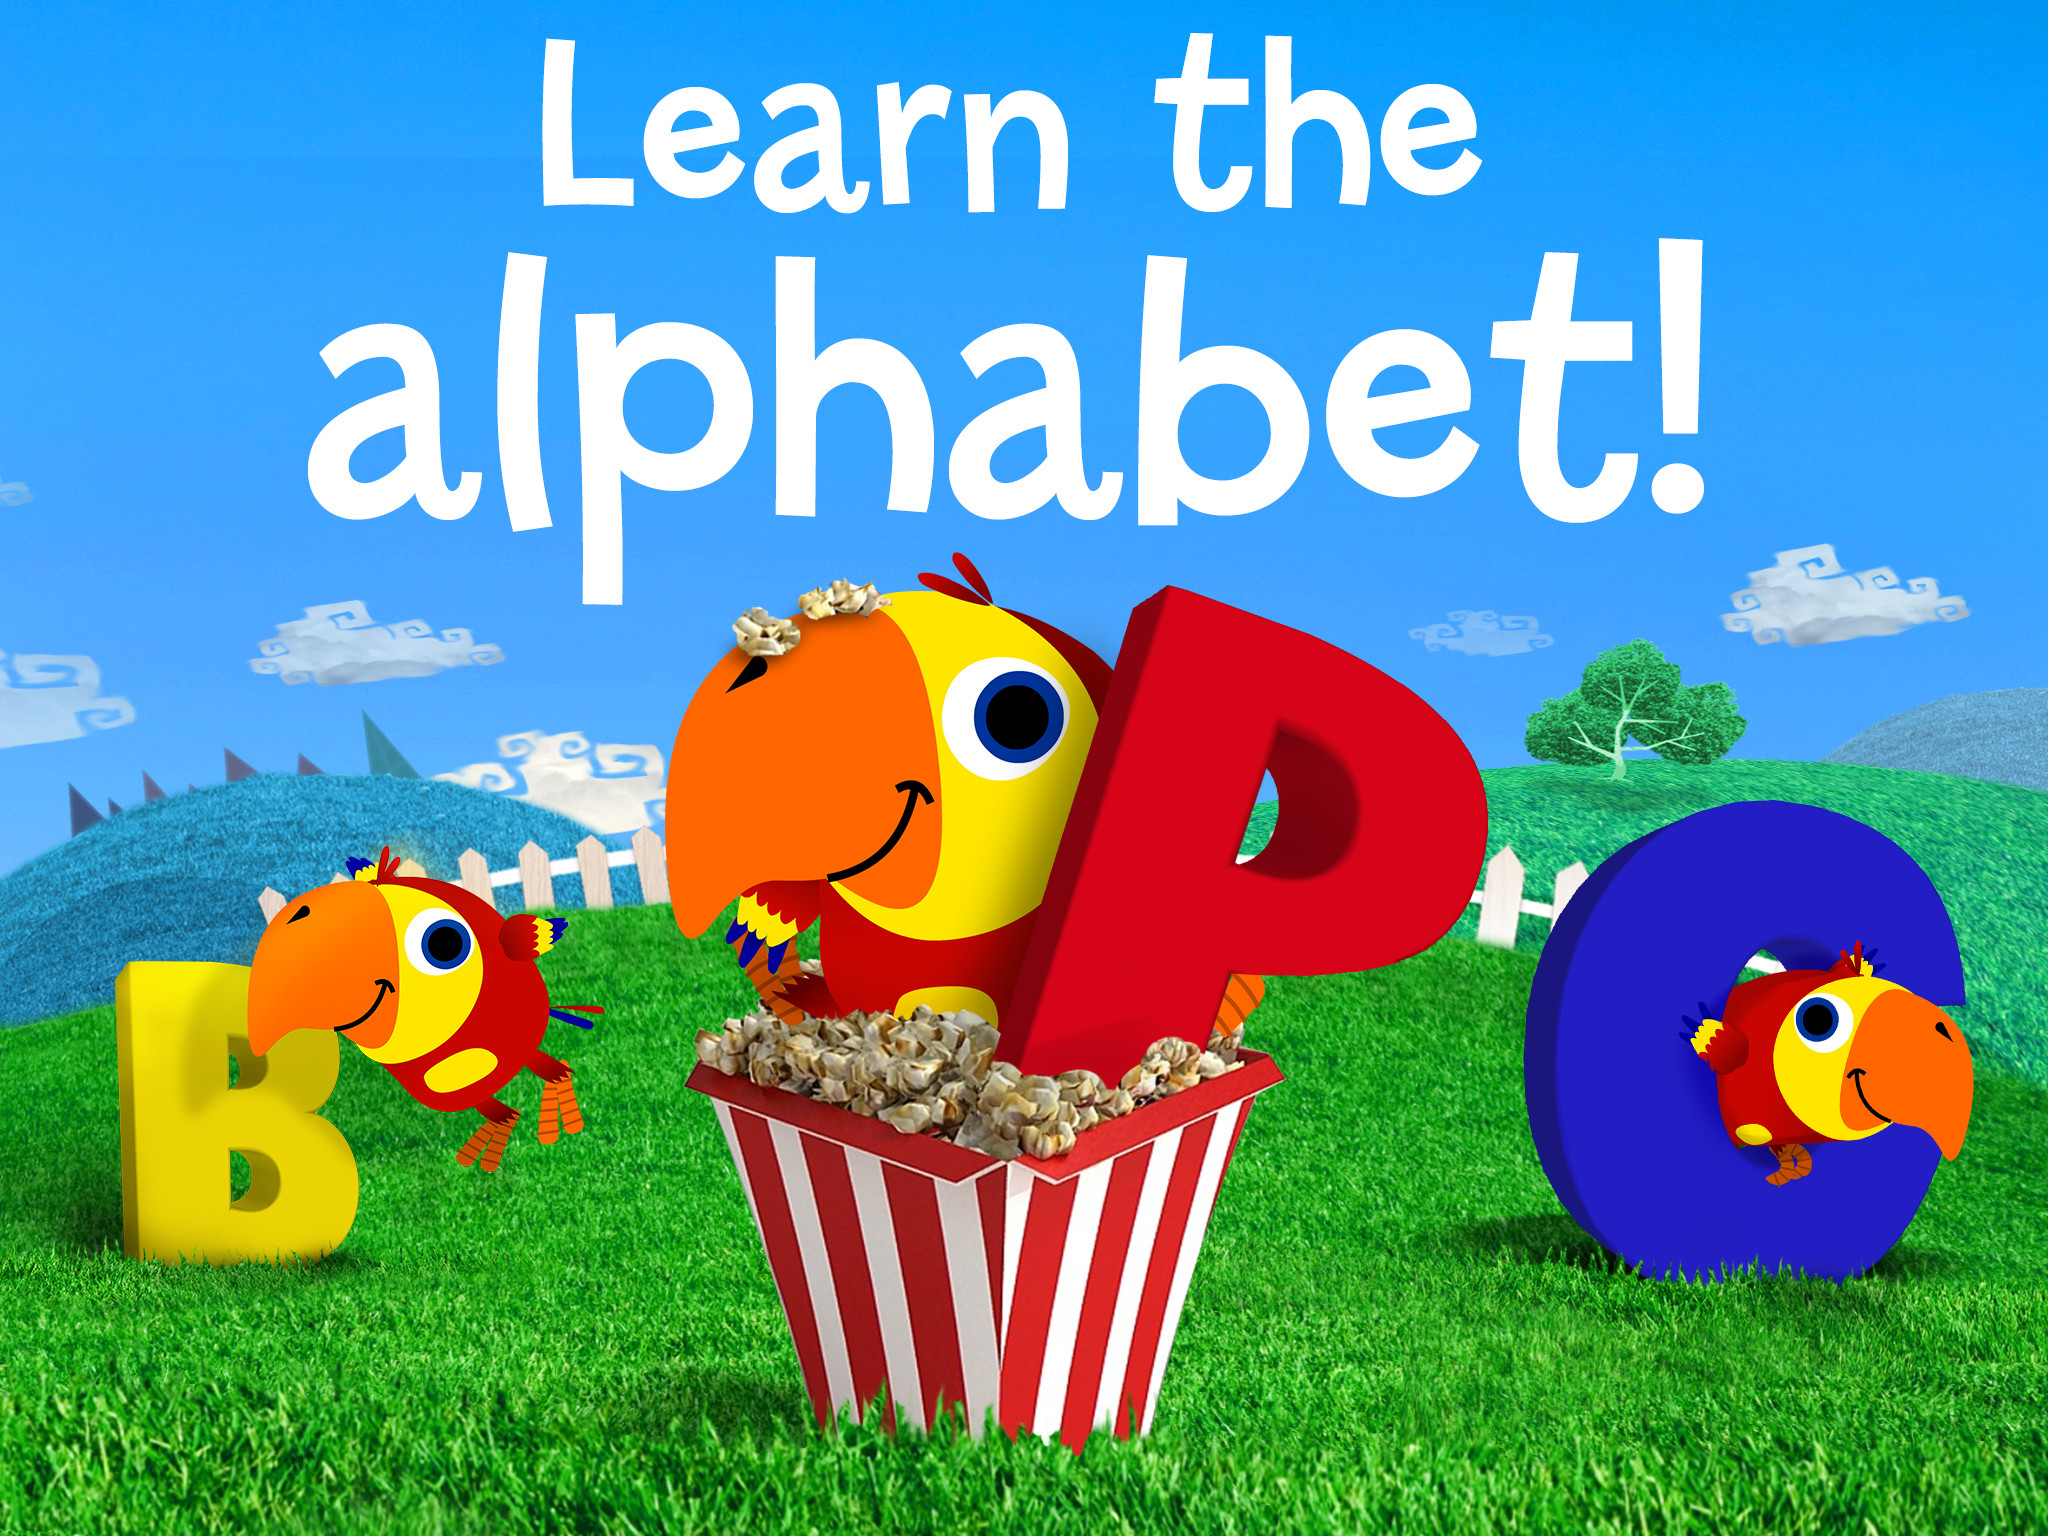 2048x1536 Our Good Free App of the Day is ABC Learning Game for Toddlers, a free app  designed to help youngsters who are learning the phonetic alphabet.